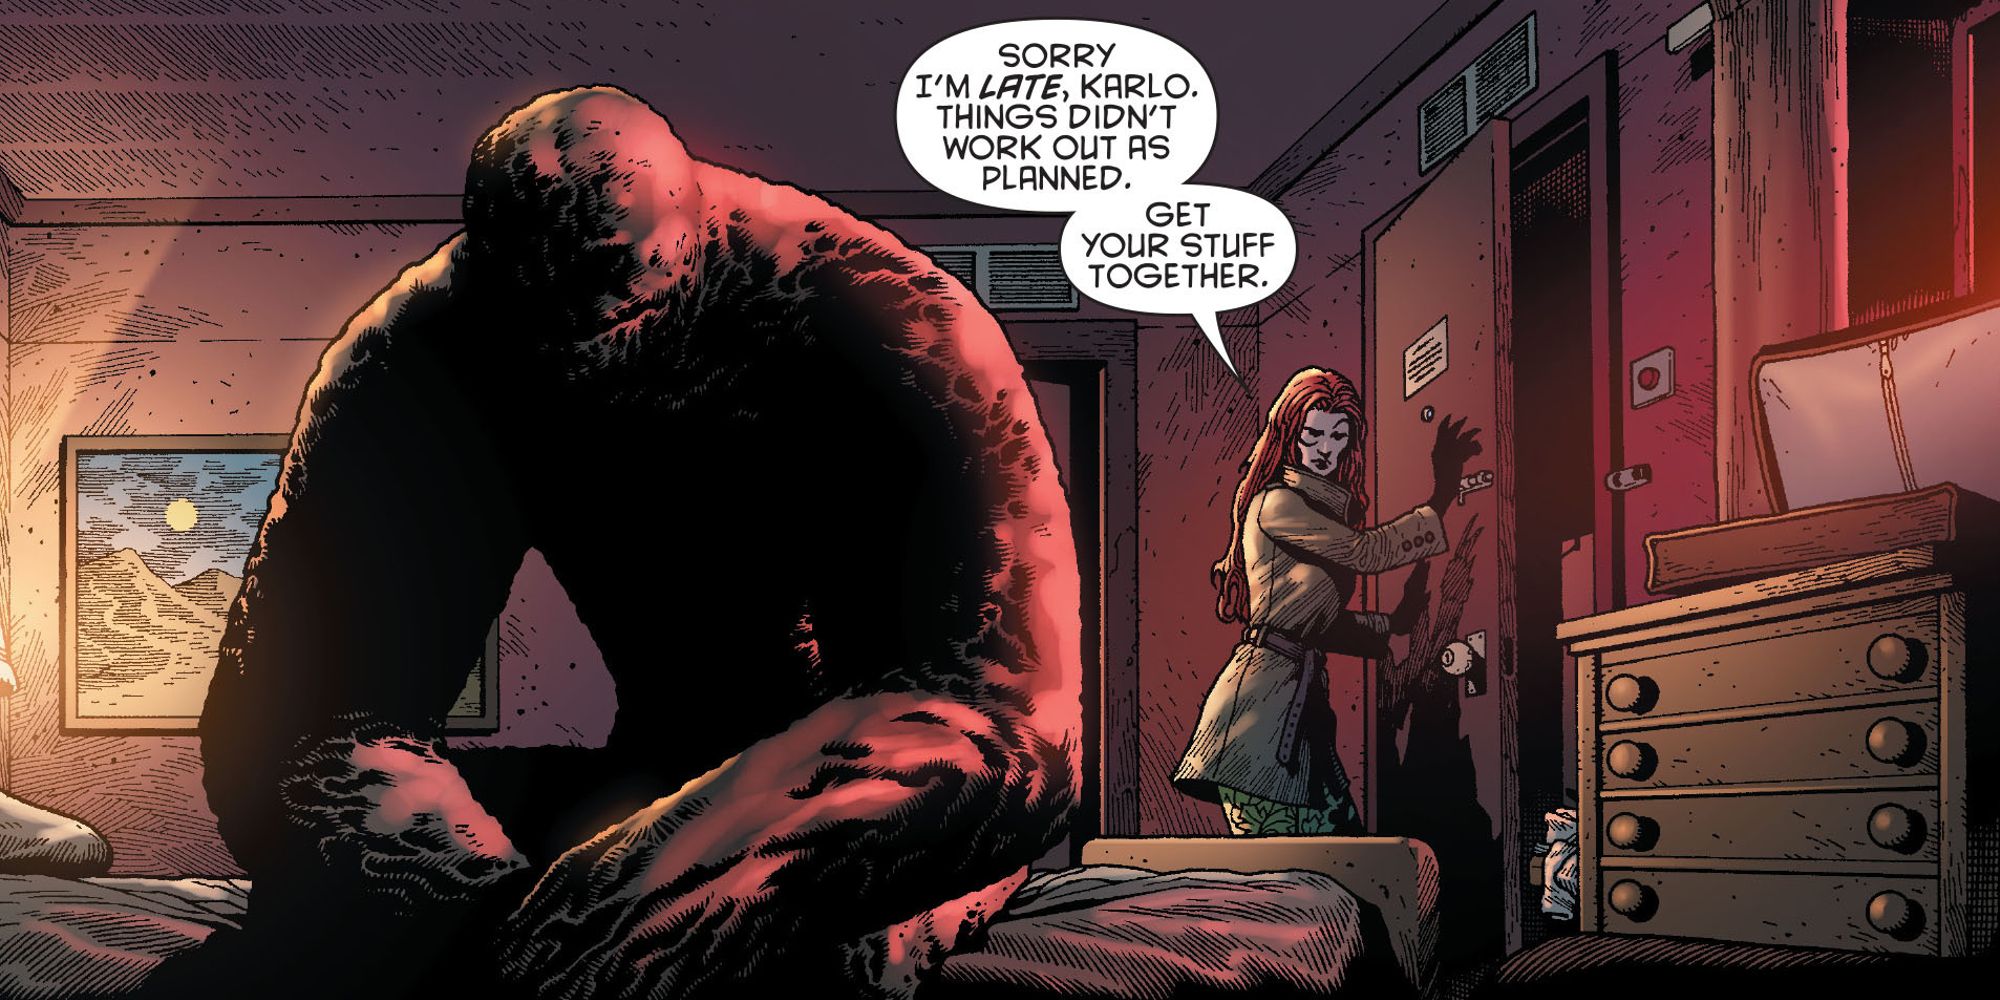 Clayface being betrayed by Poison Ivy in Detective Comics #15